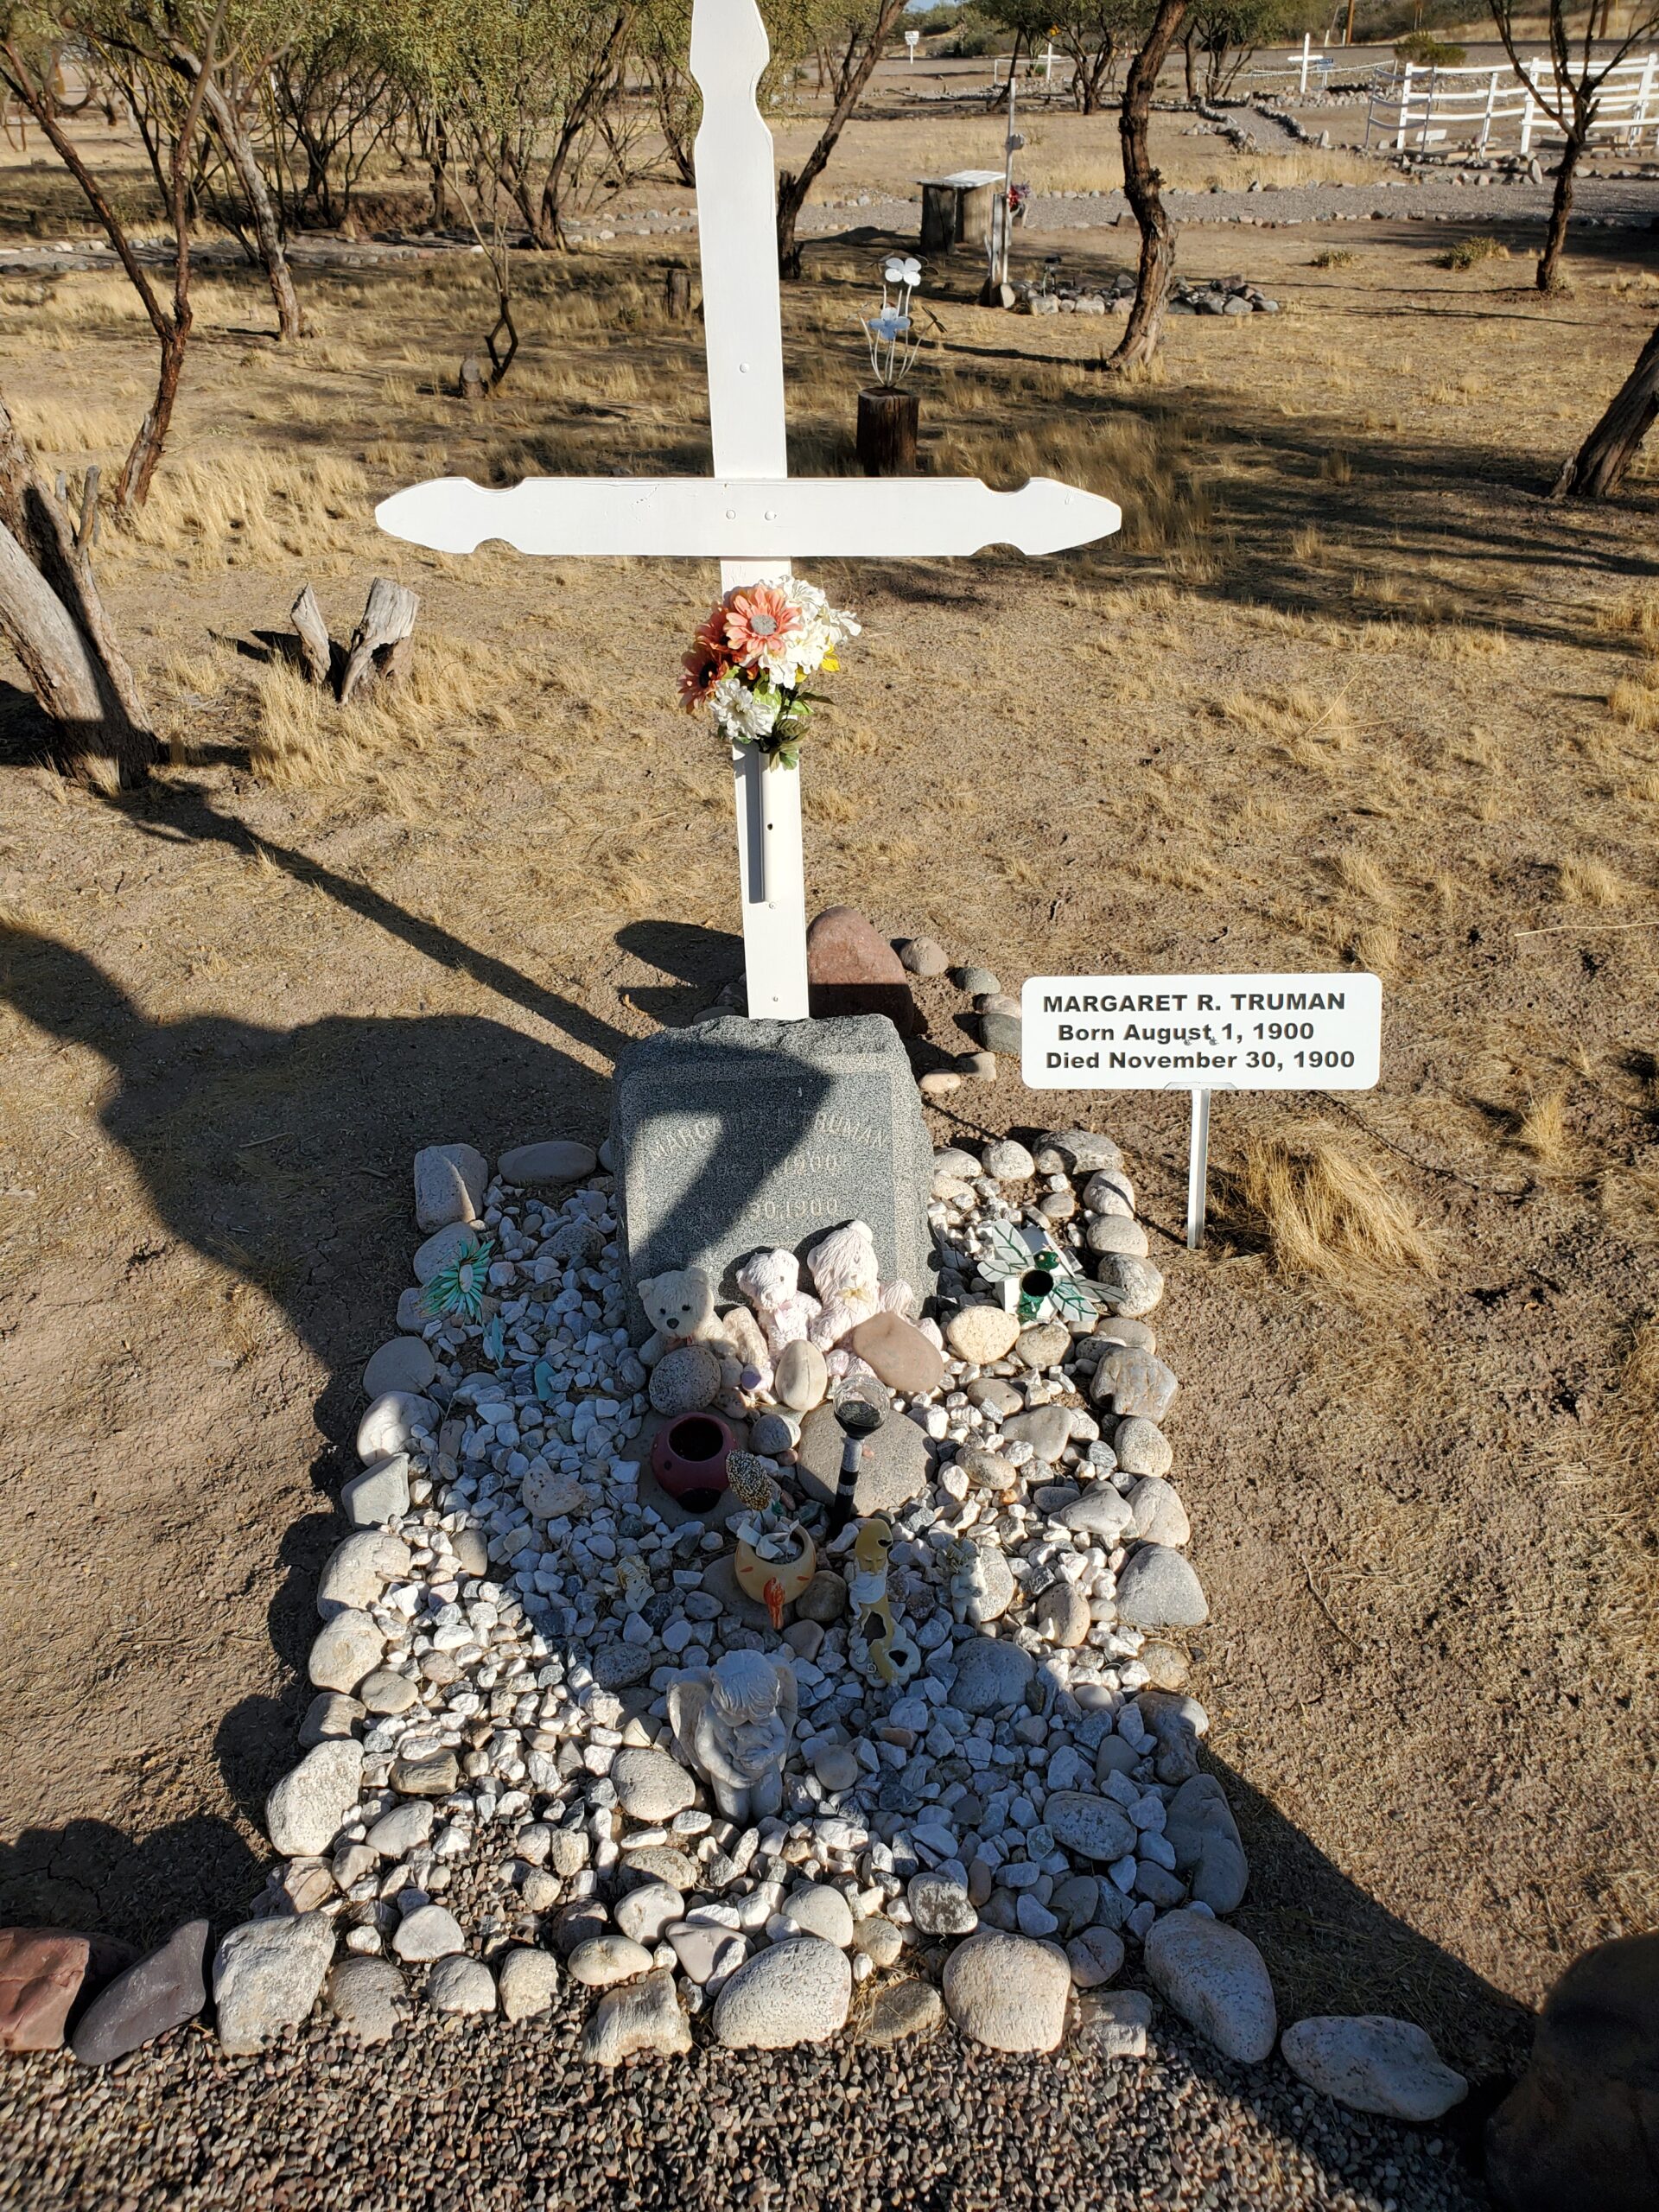 Margaret's grave has a white cross and a small placard explaining her name, birth and death dates.